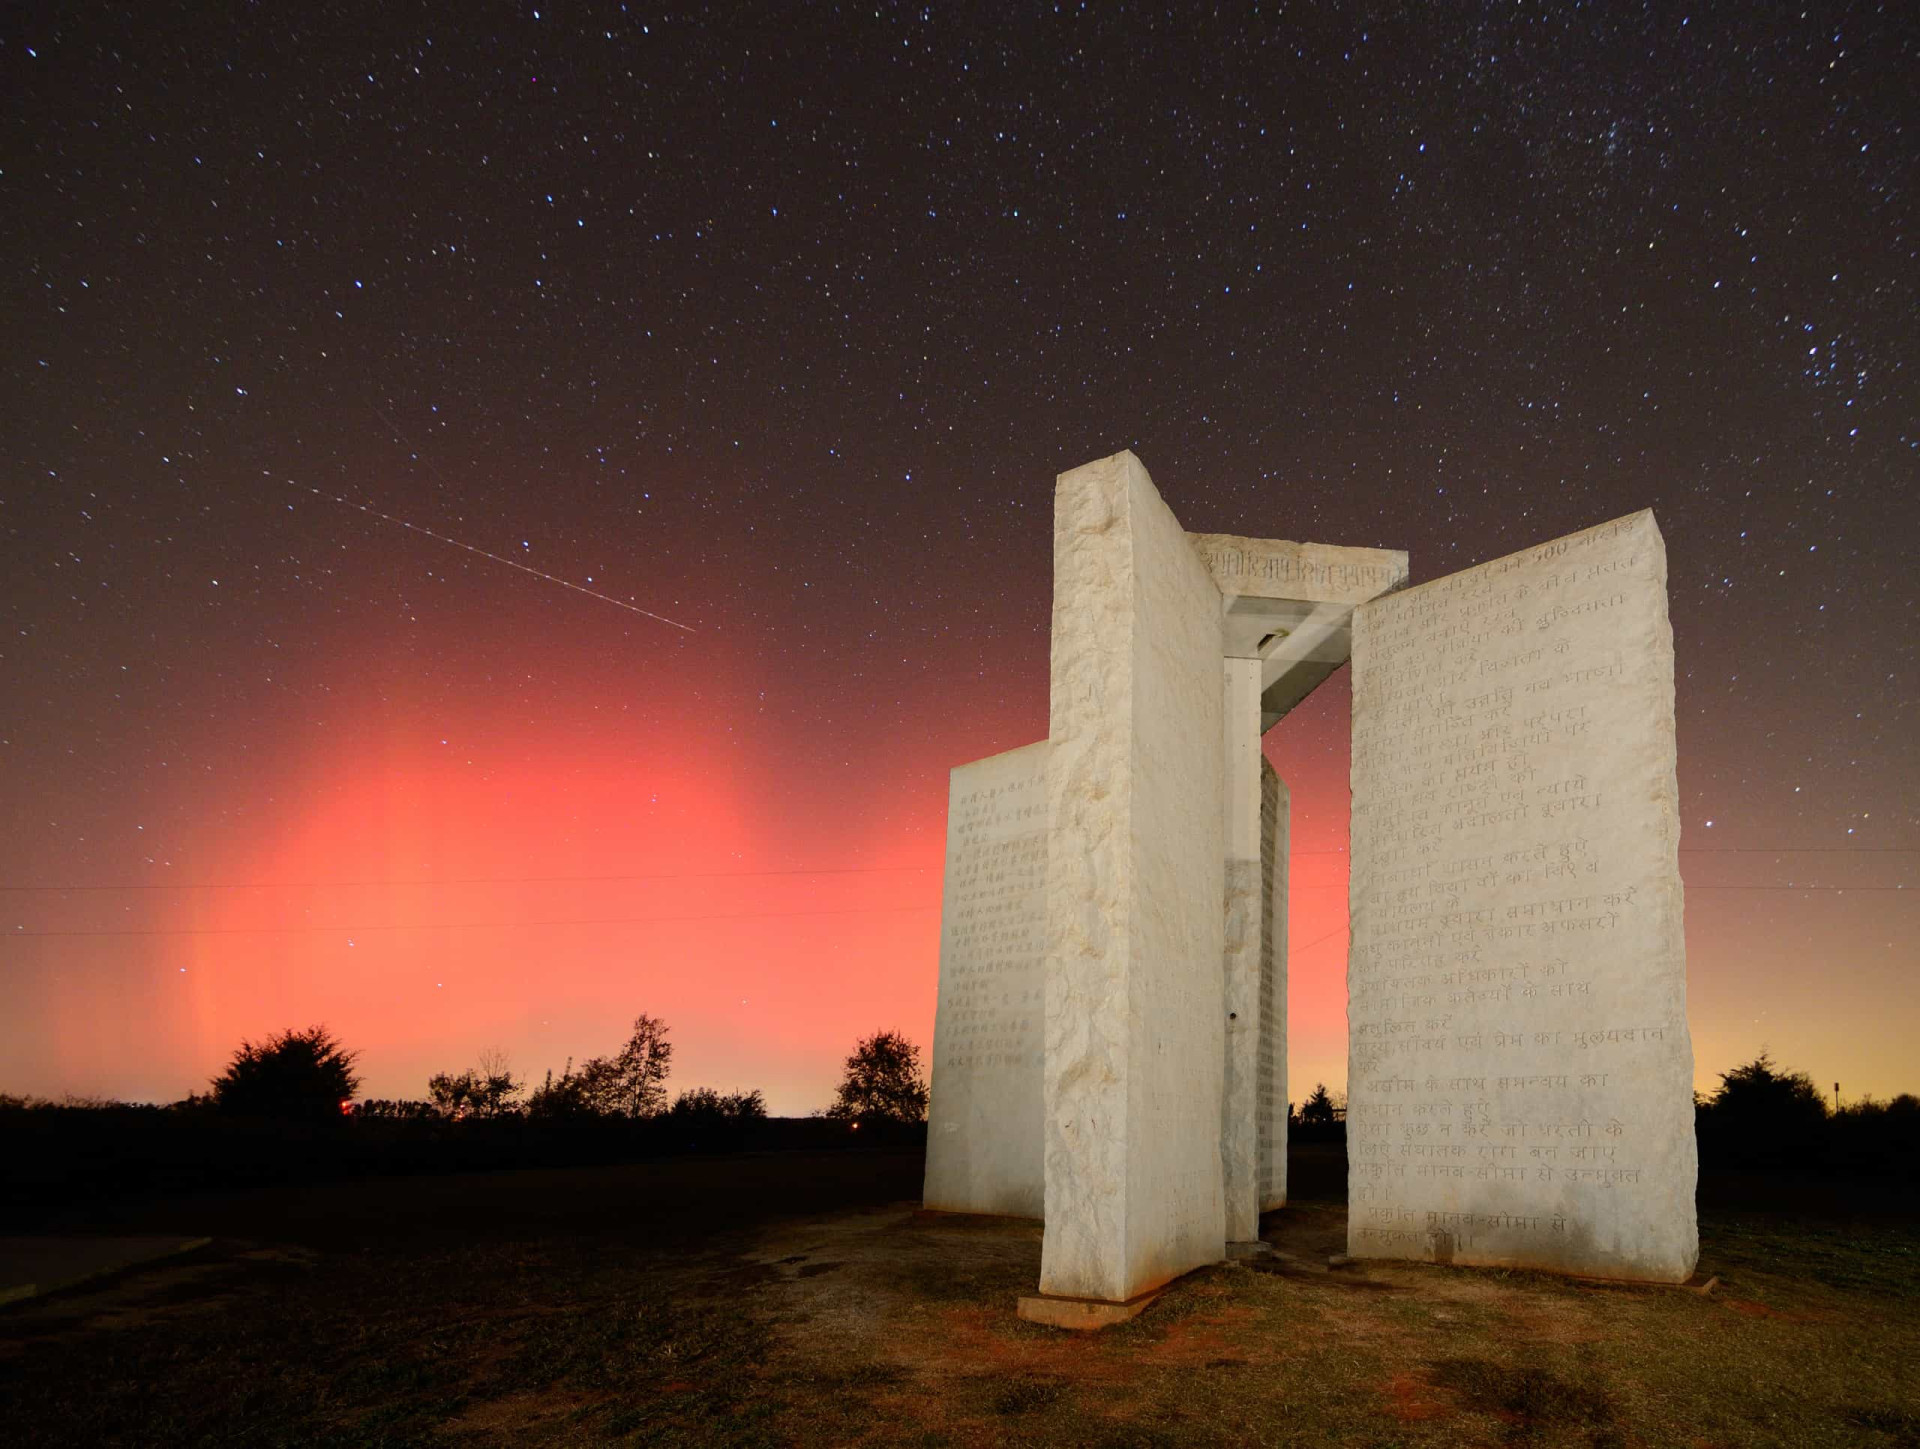 <p>America's answer to Stonehenge, these imposing granite monoliths pose a mystery. Just north of the city of Elberton on Georgia Highway 77, the 19-ft (5.7-m) slabs are engraved with multilingual messages about the future of mankind. Erected in 1980, nobody knows who commissioned the structure, or why.</p><p>You may also like:<a href="https://www.starsinsider.com/n/320905?utm_source=msn.com&utm_medium=display&utm_campaign=referral_description&utm_content=487017v3en-us"> This is the coldest inhabited place on Earth</a></p>